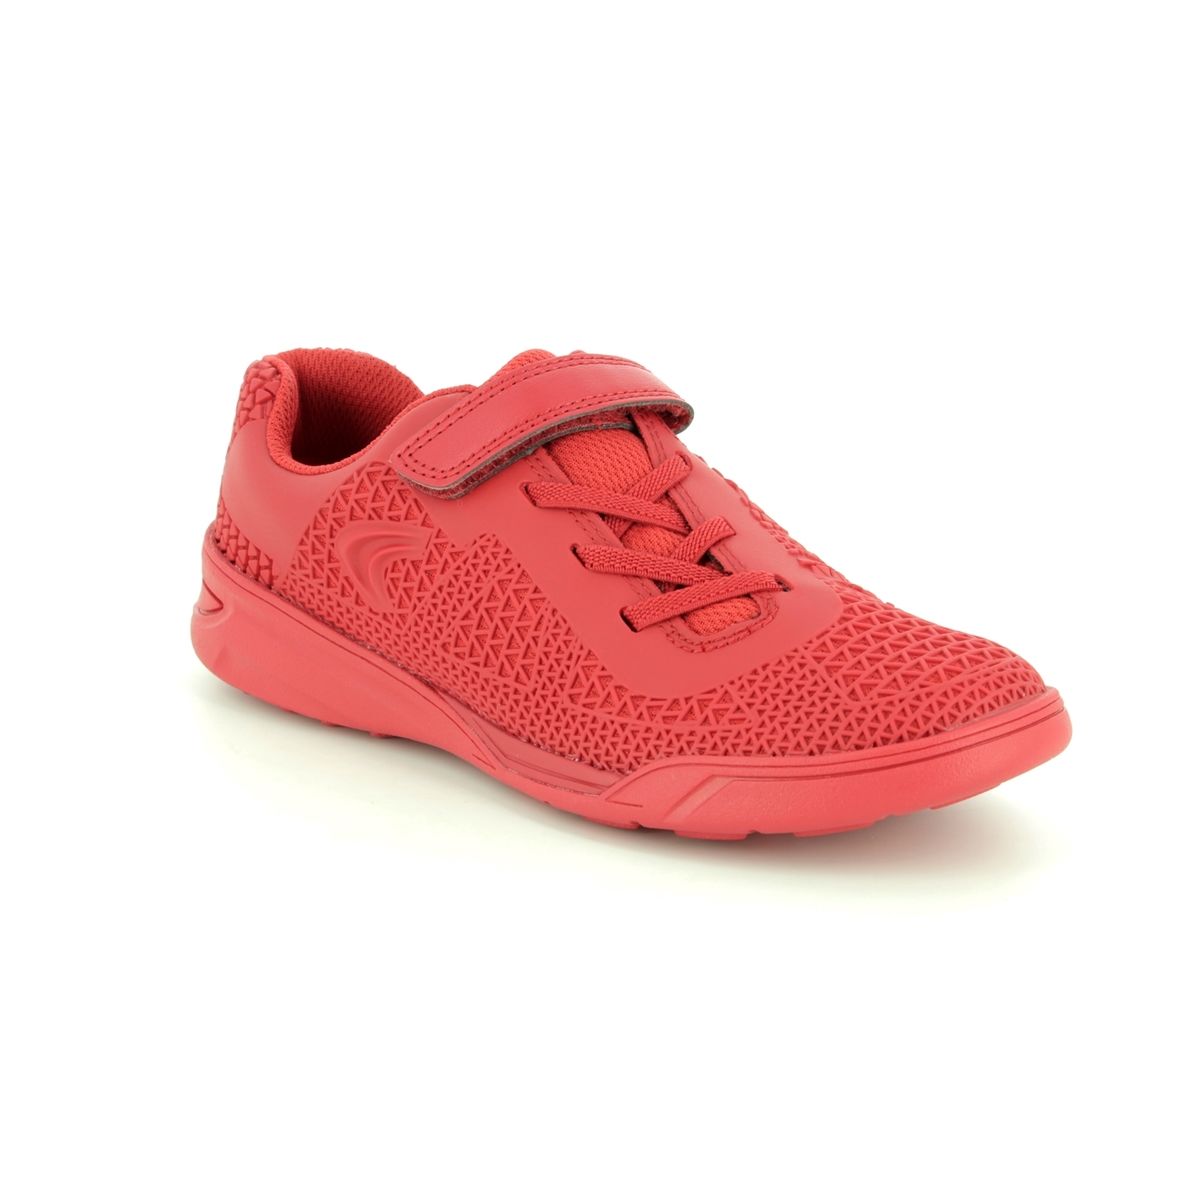 Clarks Award Blaze Inf G Fit Red trainers